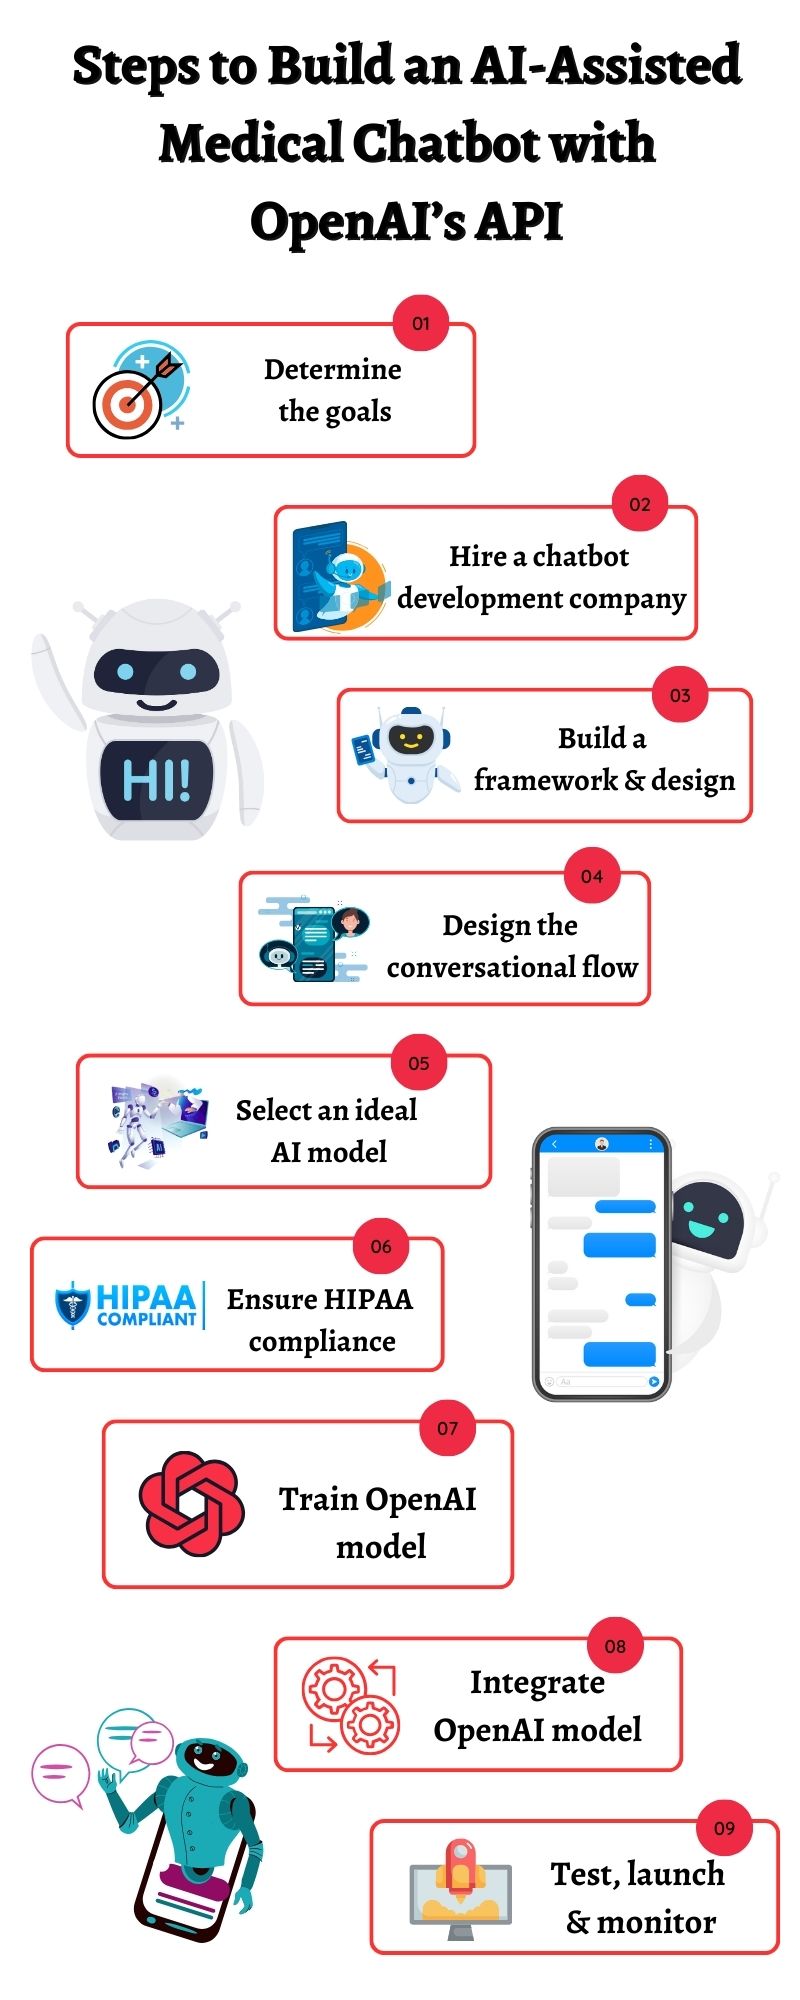 Build an AI-Assisted Medical Chatbot with OpenAI’s API